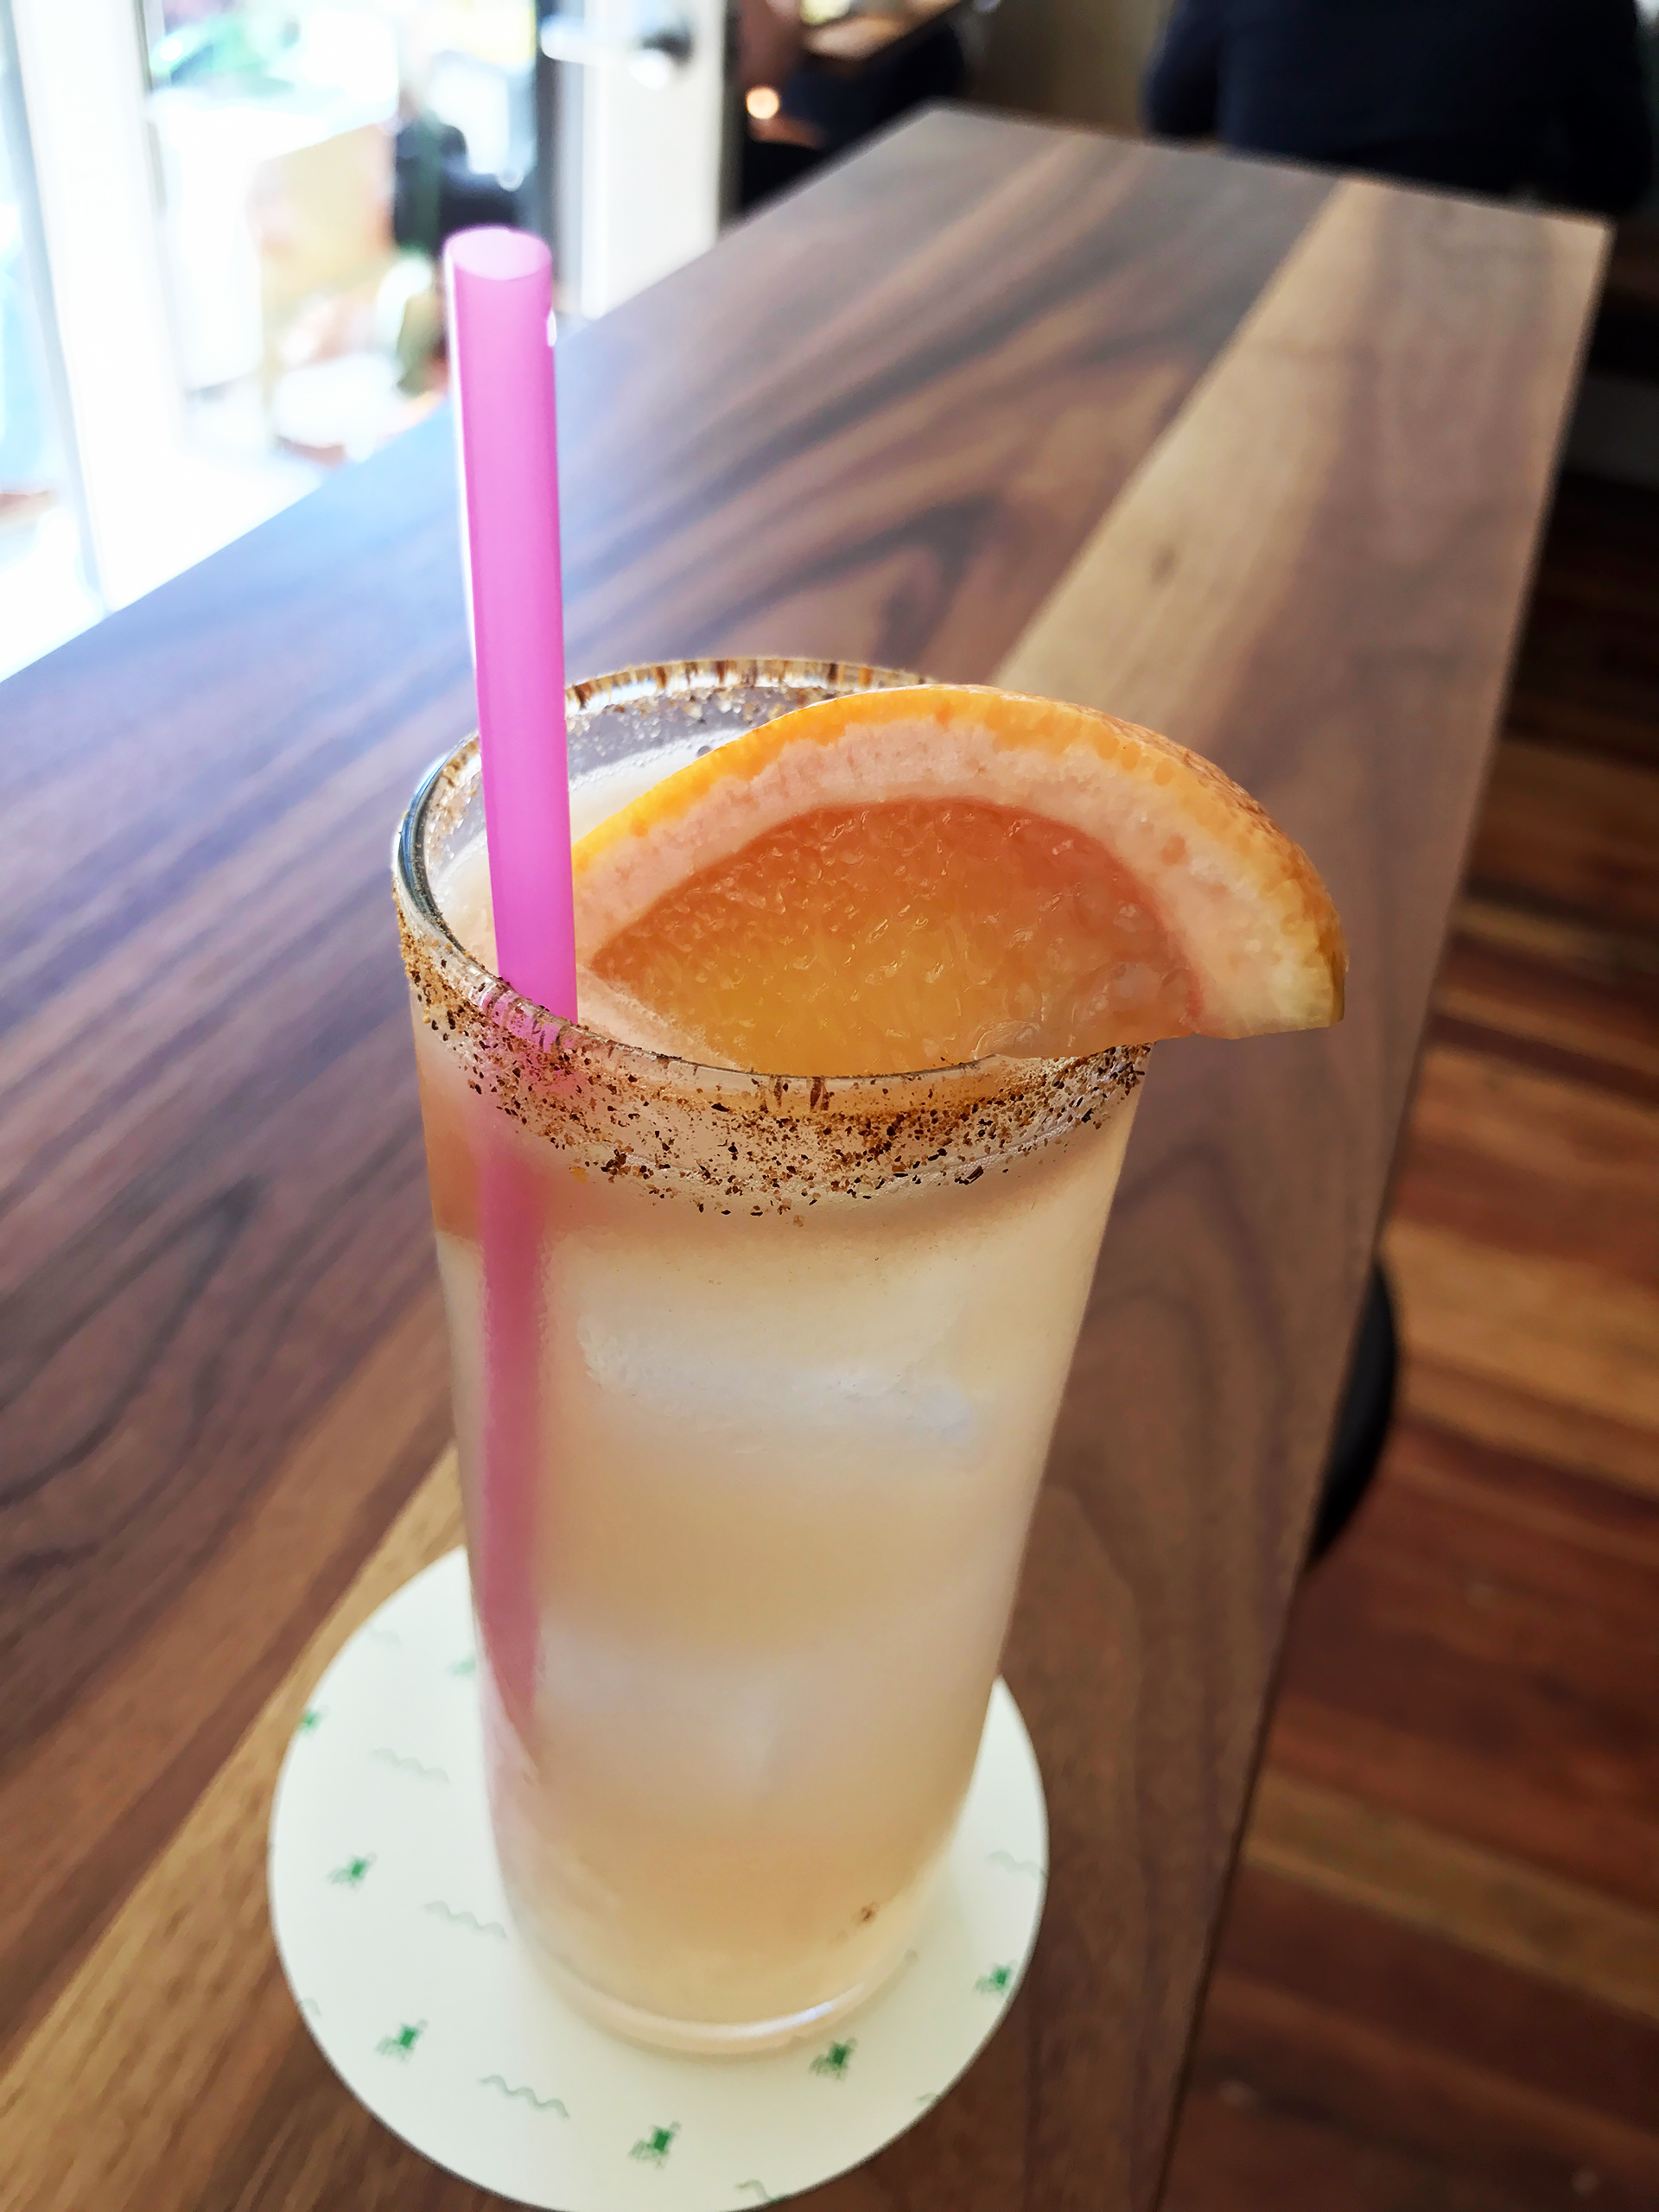 Classic Paloma cocktail with pink grapefruit juice and tequila.